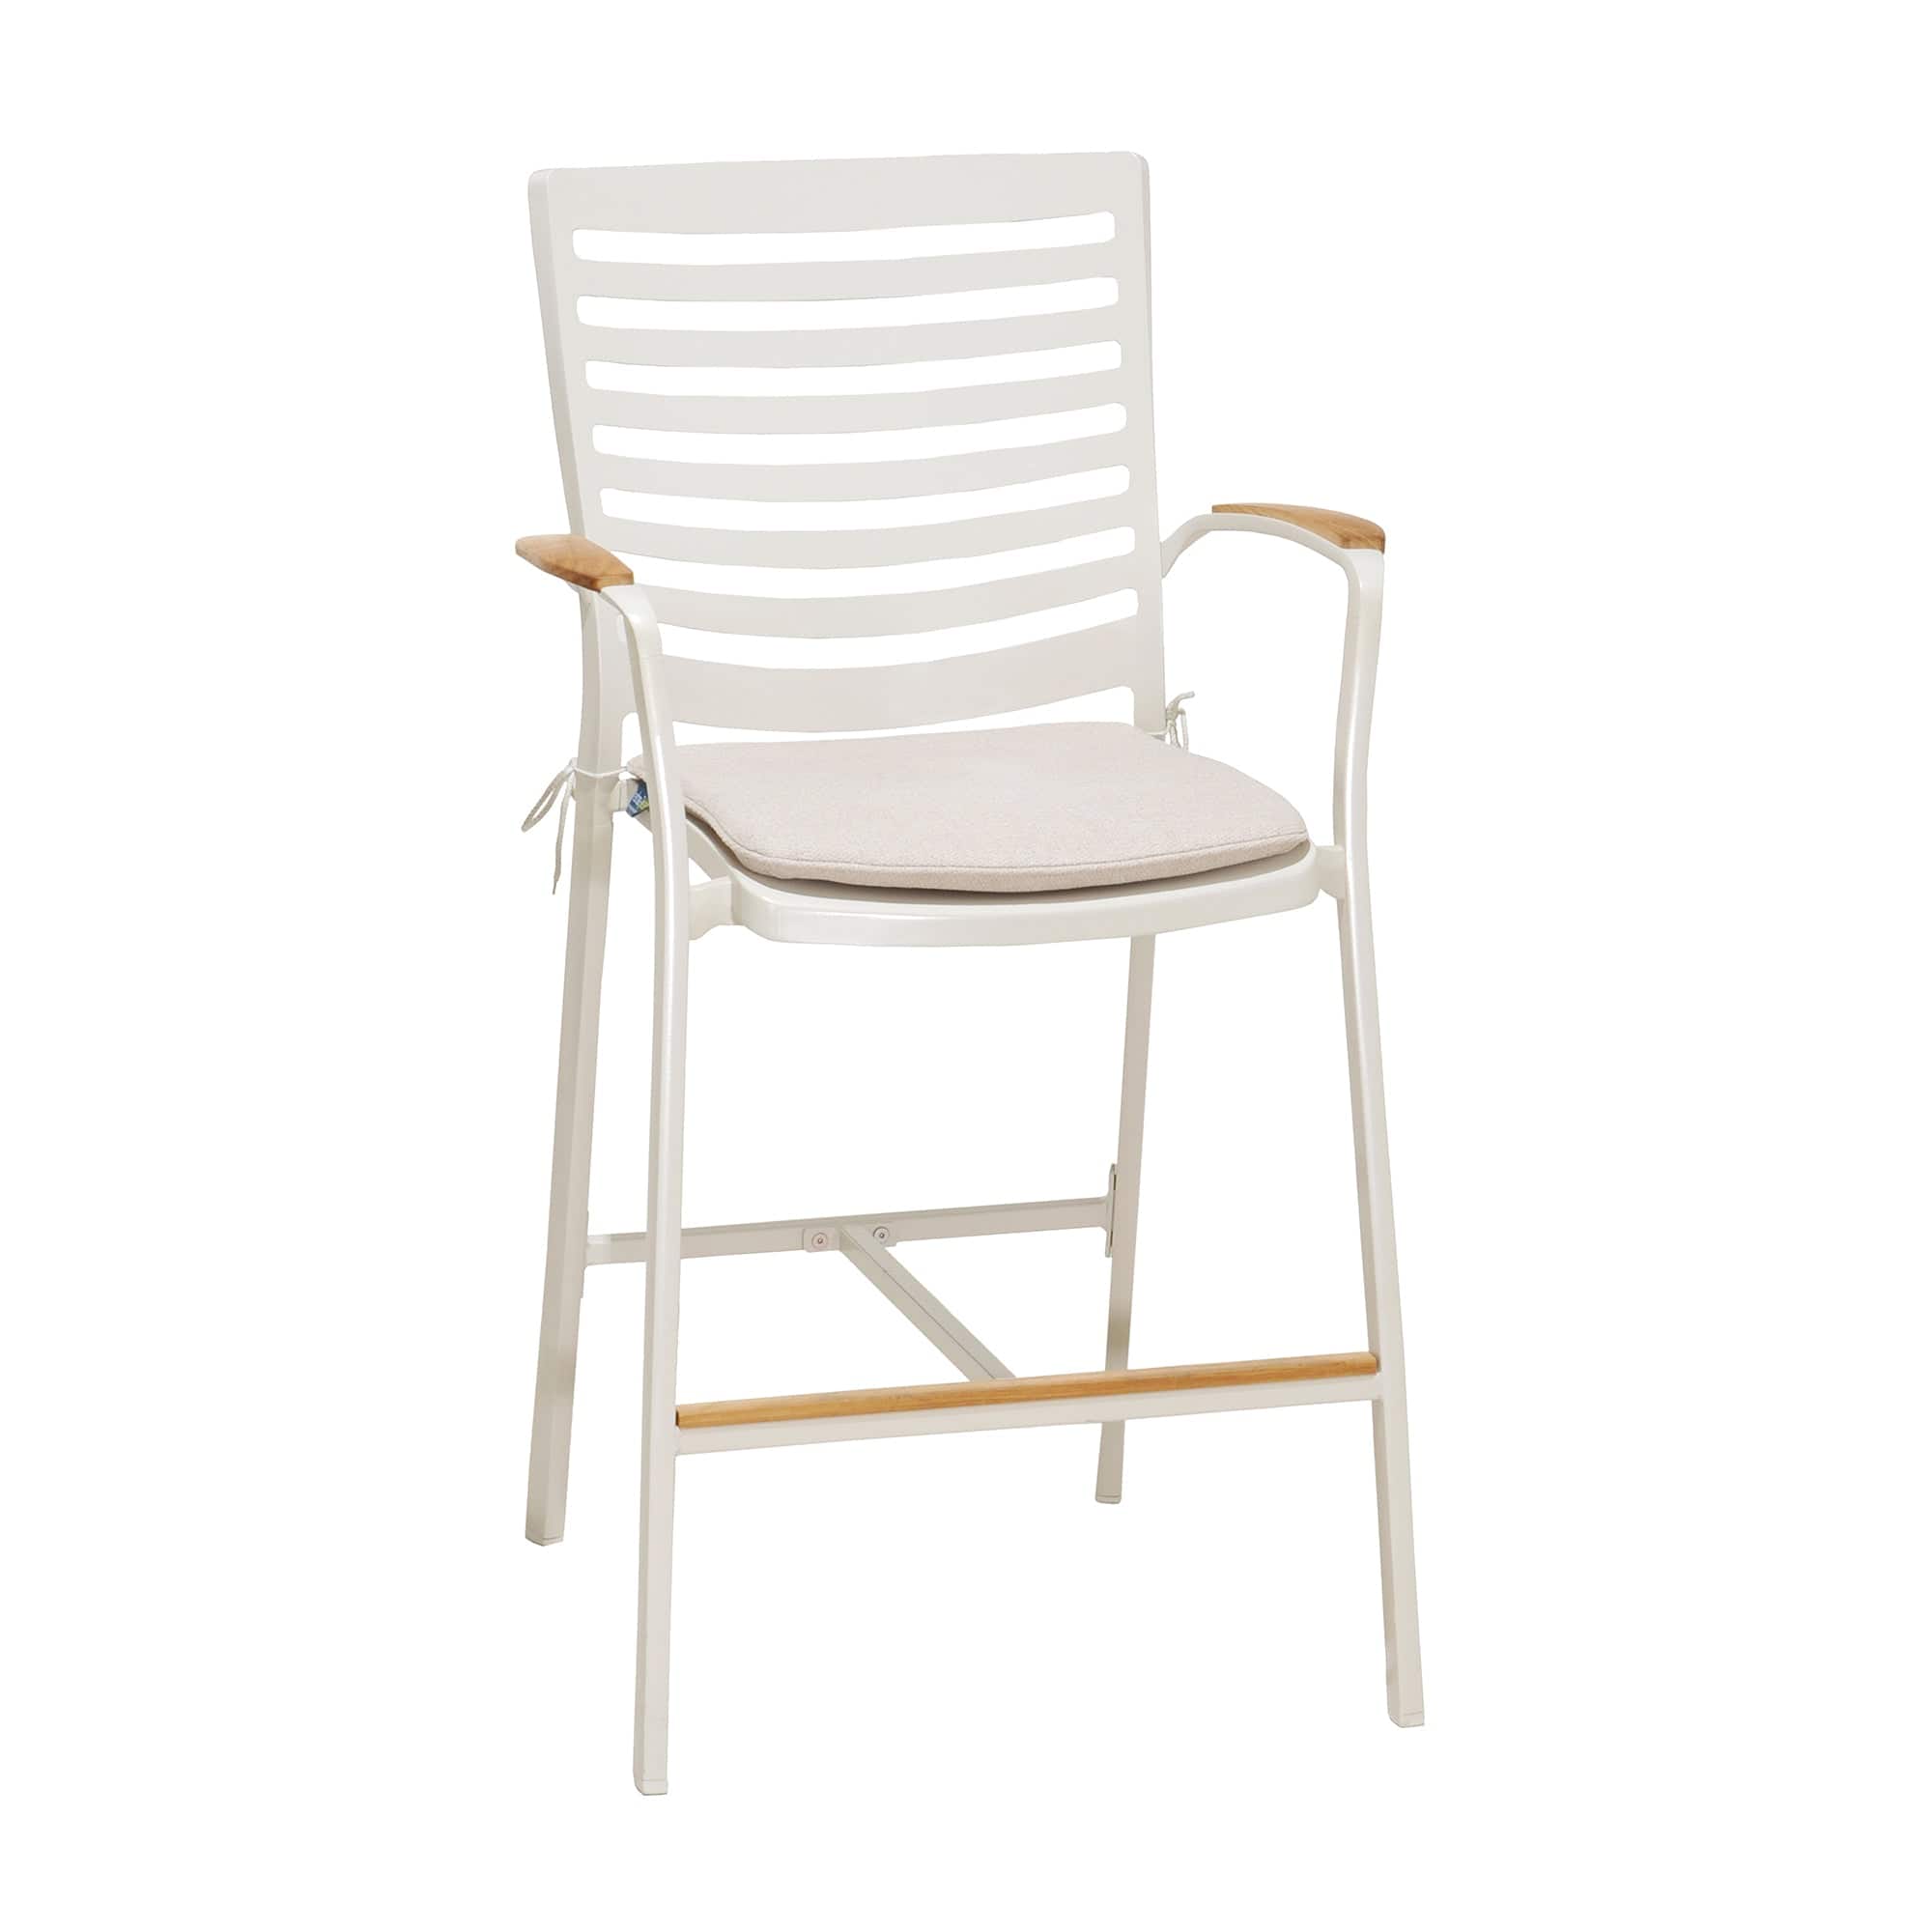 Armen Living Outdoor Barstool Armen Living | Portals Outdoor Patio Aluminum Barstool in Light Matte Sand with Natural Teak Wood Accent | LCPLBAWH